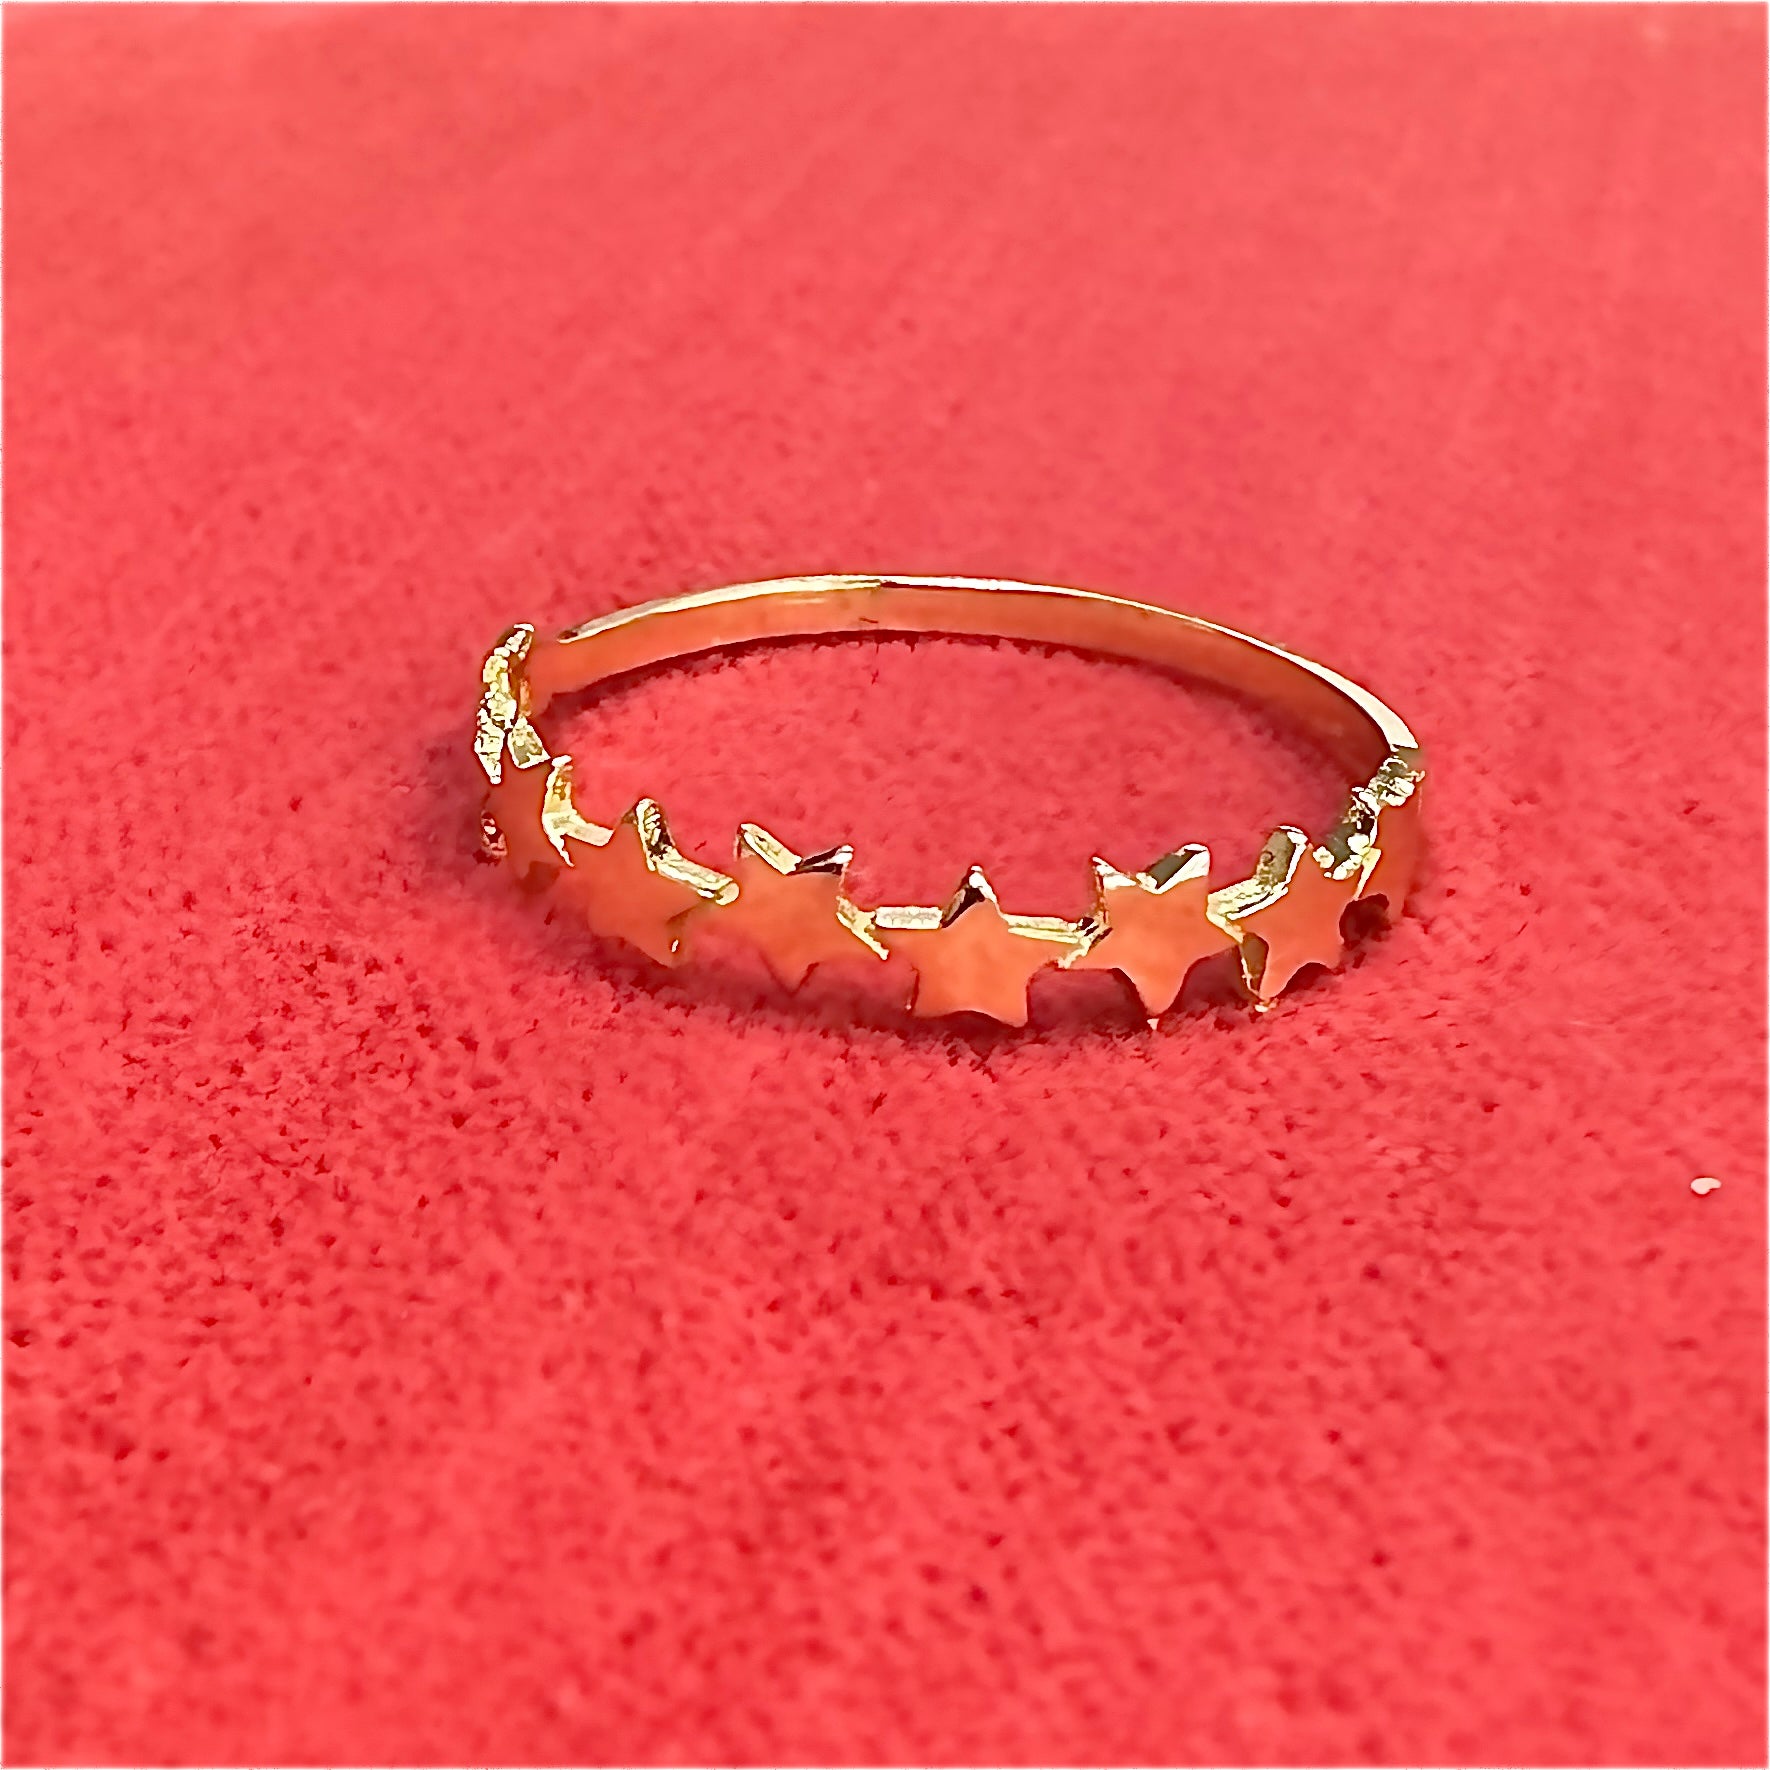 Solid 14K Yellow Gold Multi Star Ring